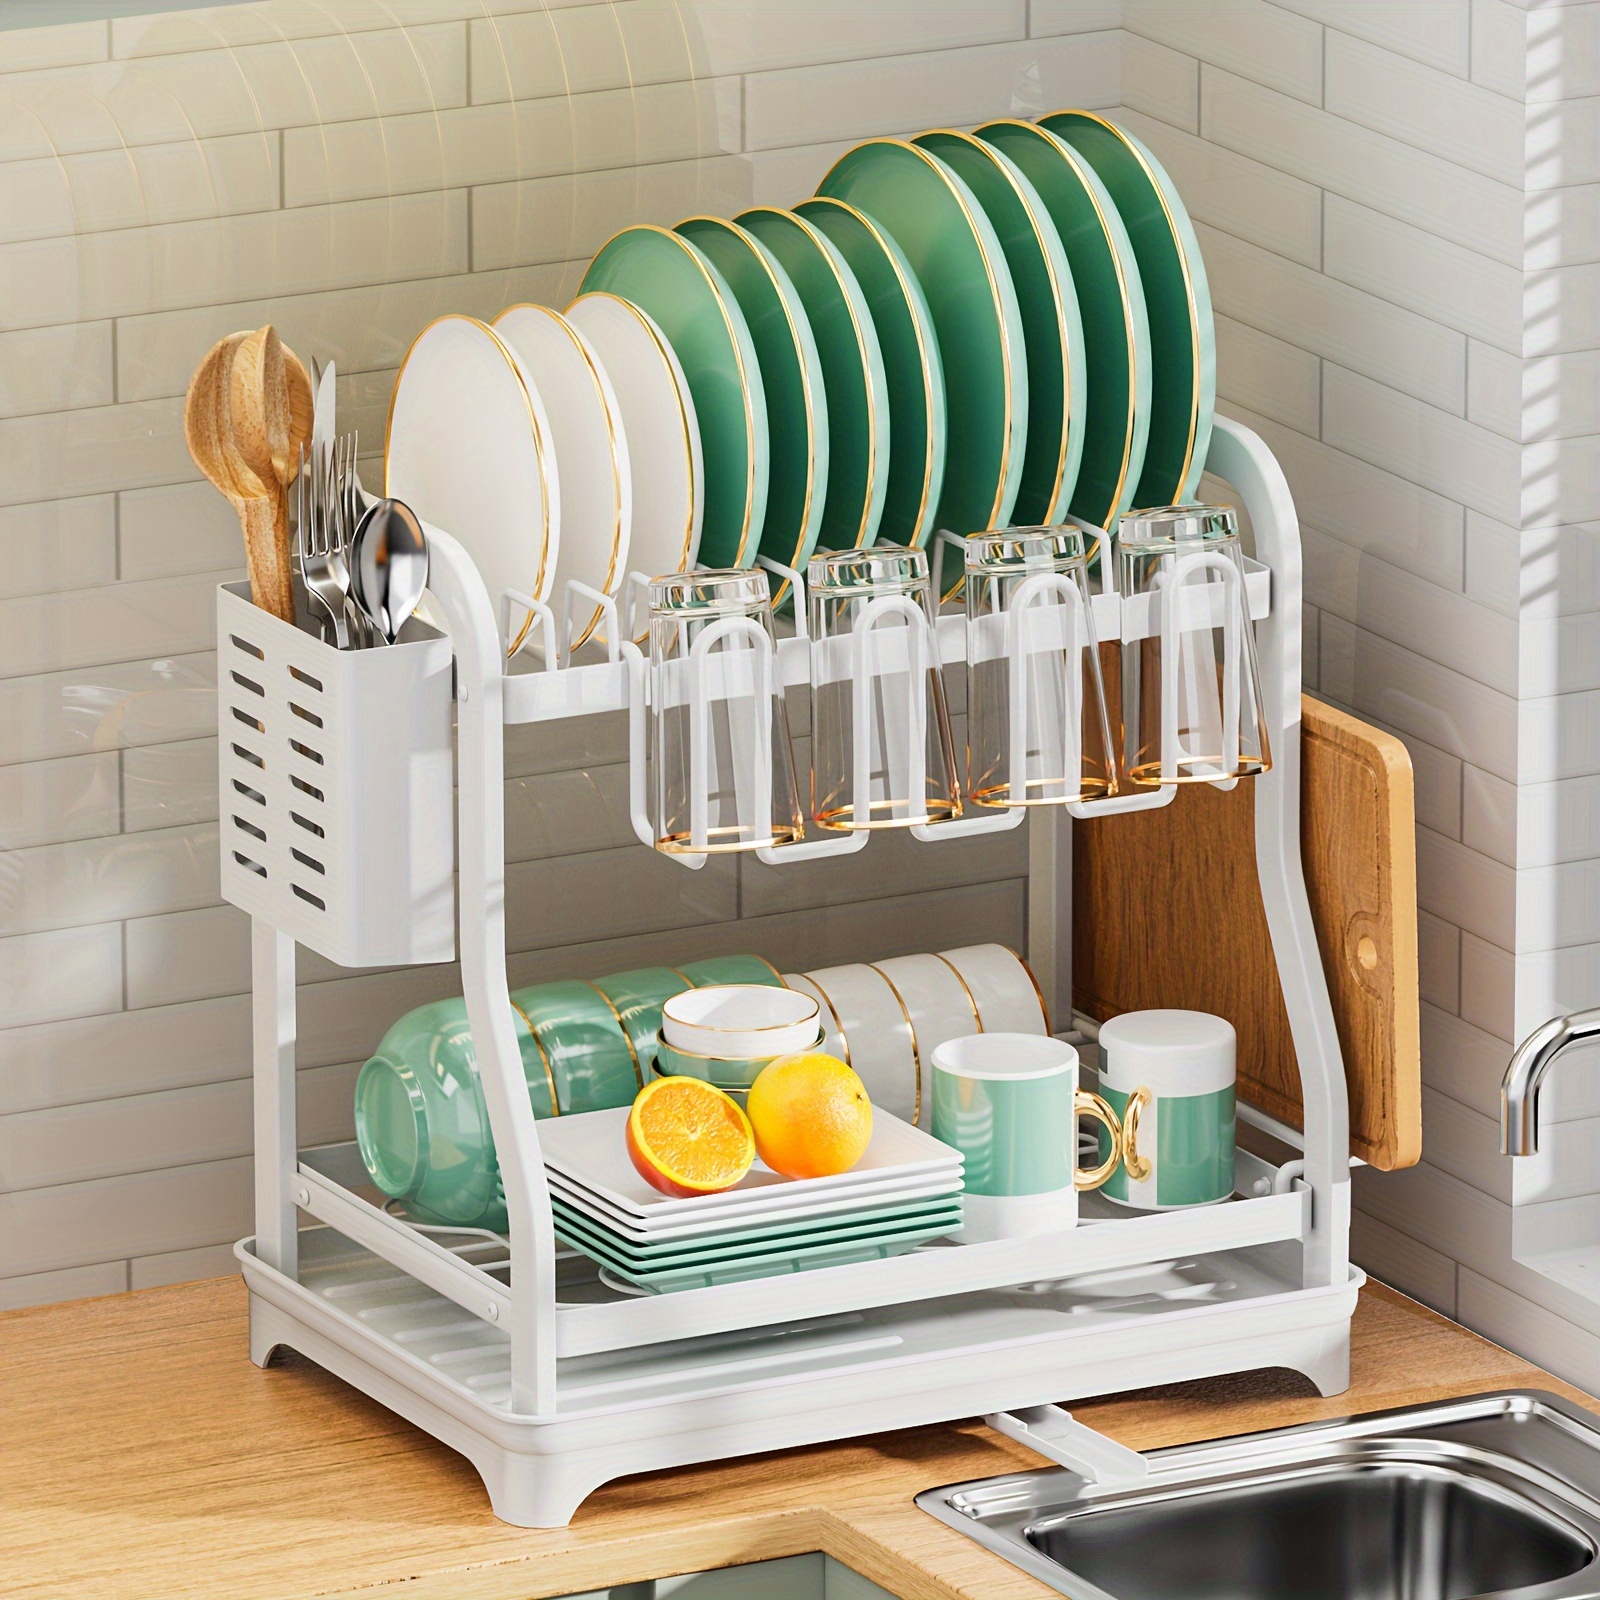 G-TING Dish Drying Rack, Dish Rack for Kitchen Counter, Rust-Proof Dish  Drainer with Drying Board and Utensil Holder for Kitchen Counter Cabinet